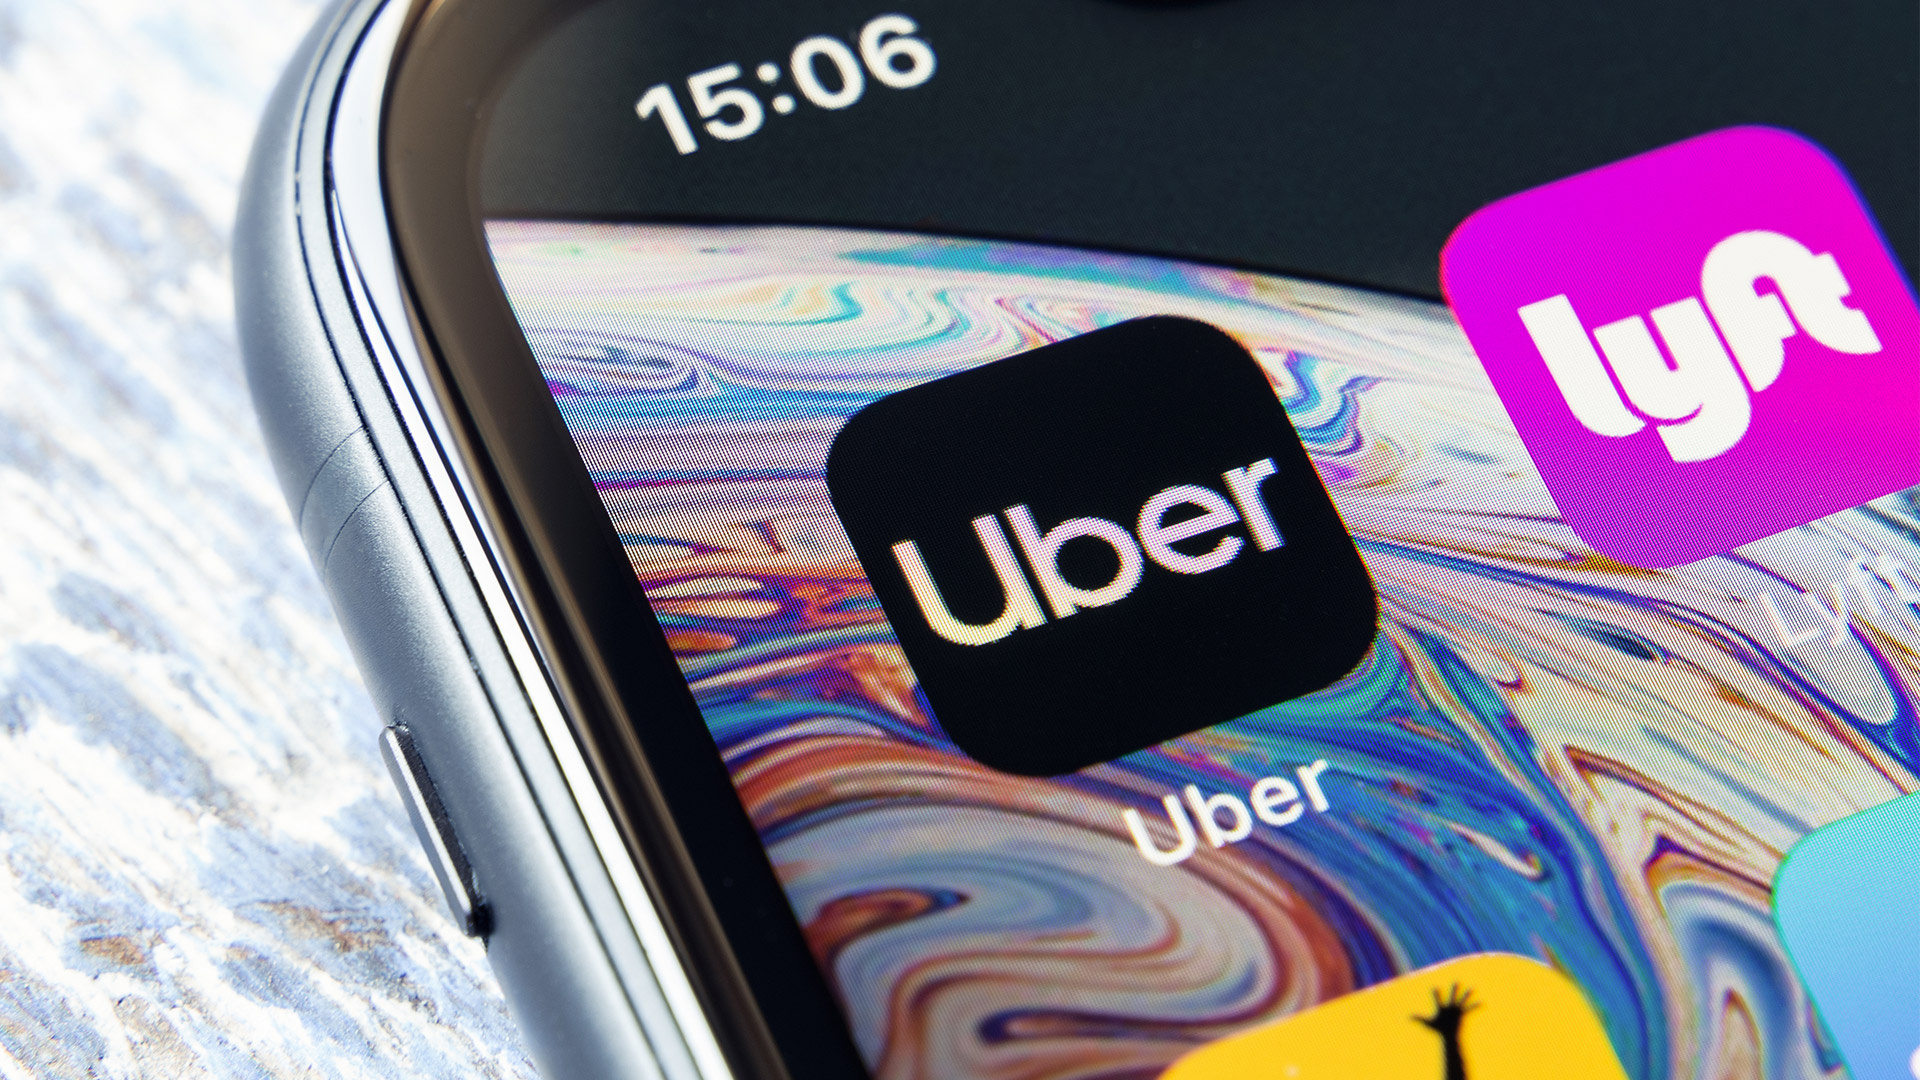 Uber: A rideshare platform connecting riders and drivers via a smartphone app. 1920x1080 Full HD Wallpaper.